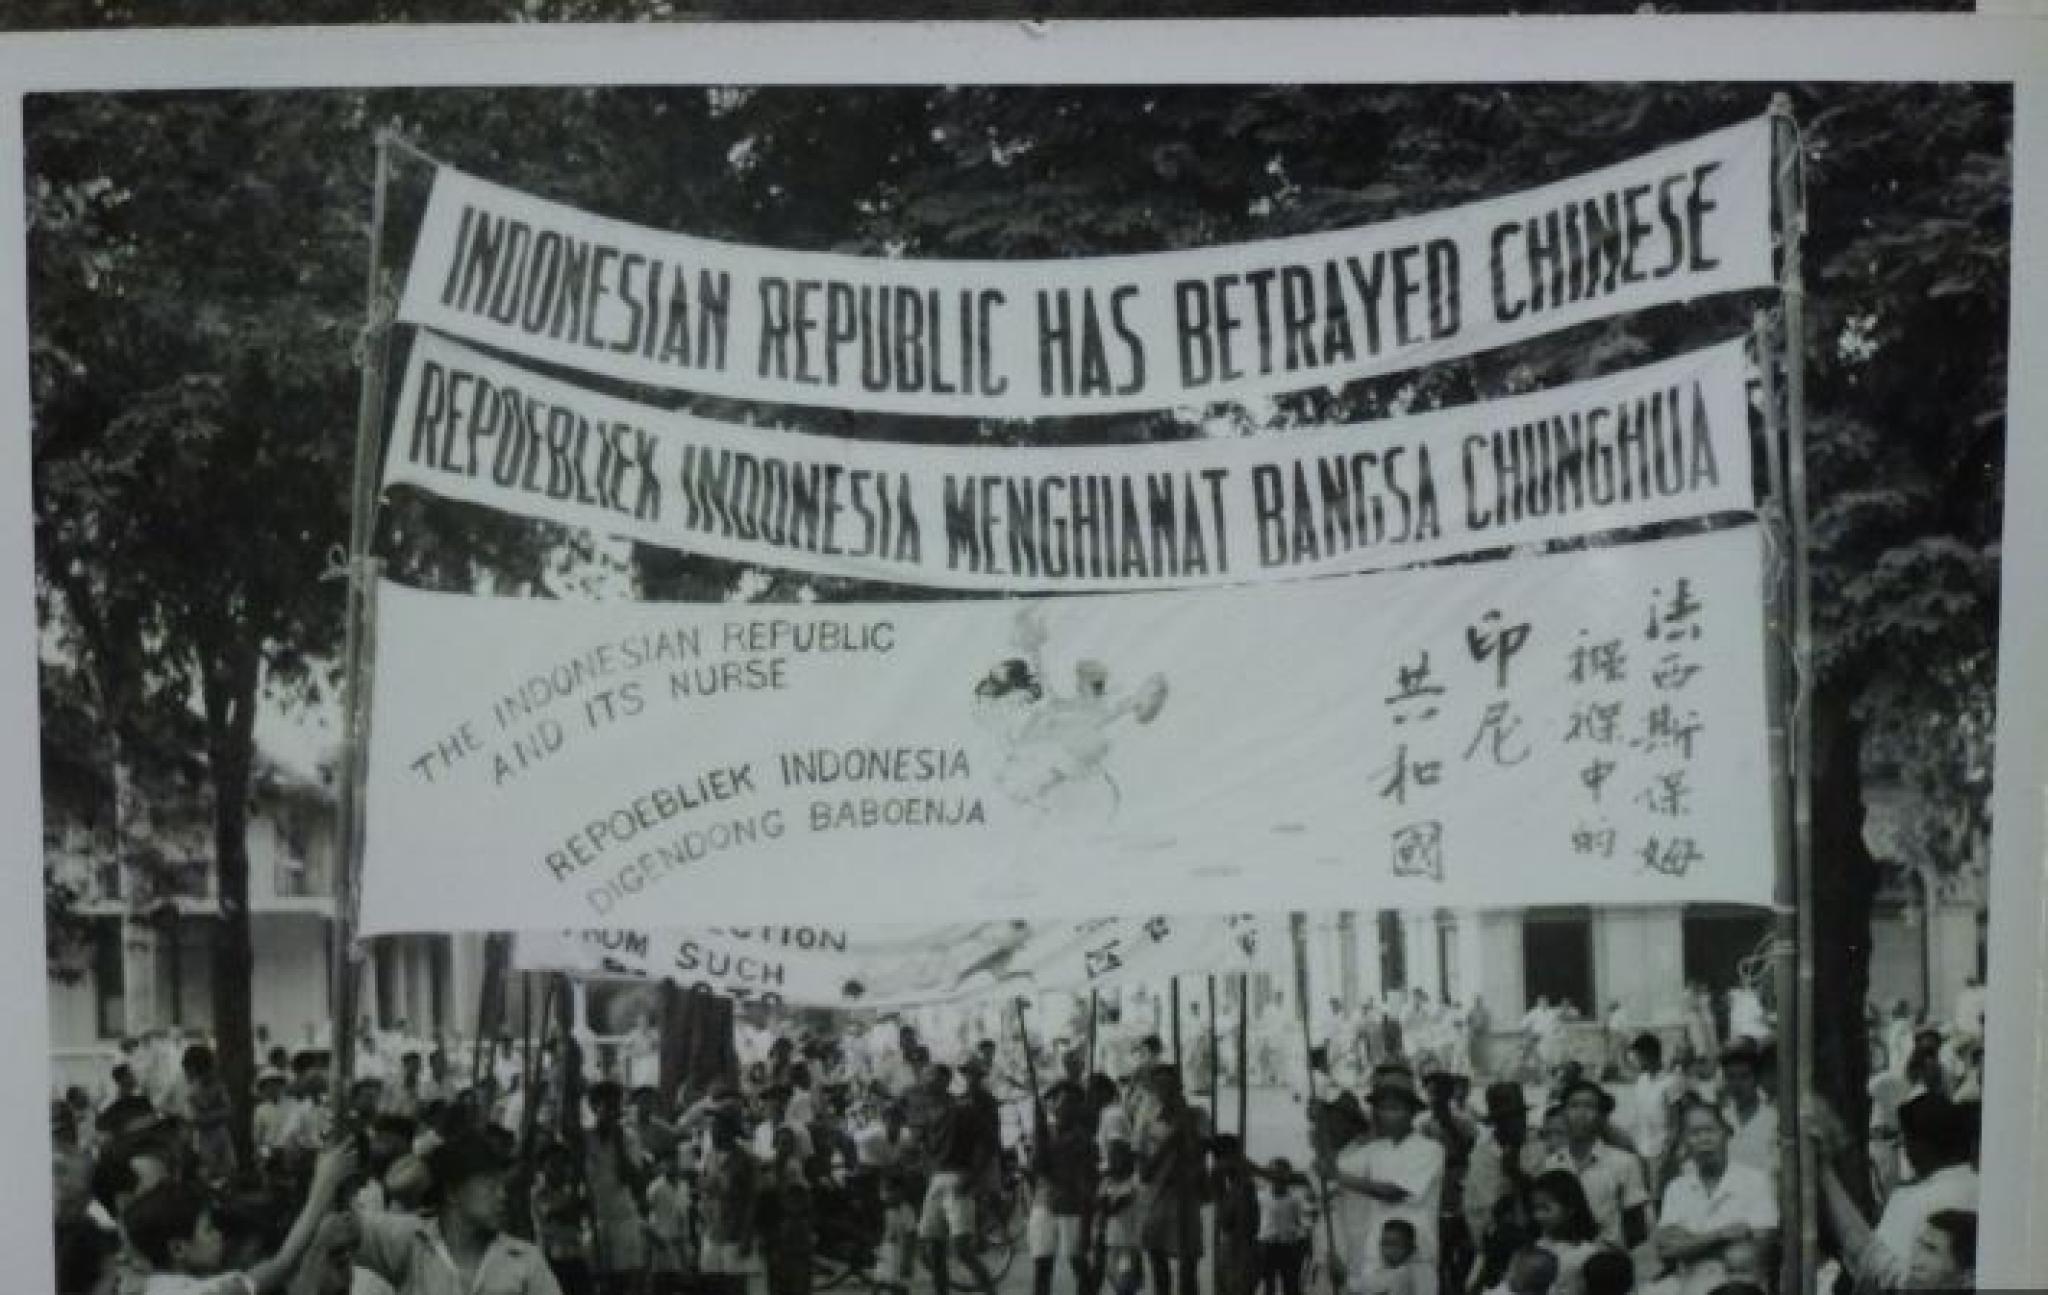 Ethnic Chinese protest during the Indonesian National Revolution. Photo: from an album named ‘Chinese Atrocities’, box 19, folder 11, Niels A. Douwes Dekker Papers, No 3480, Division of Rare and Manuscript Collections, Cornell University Library